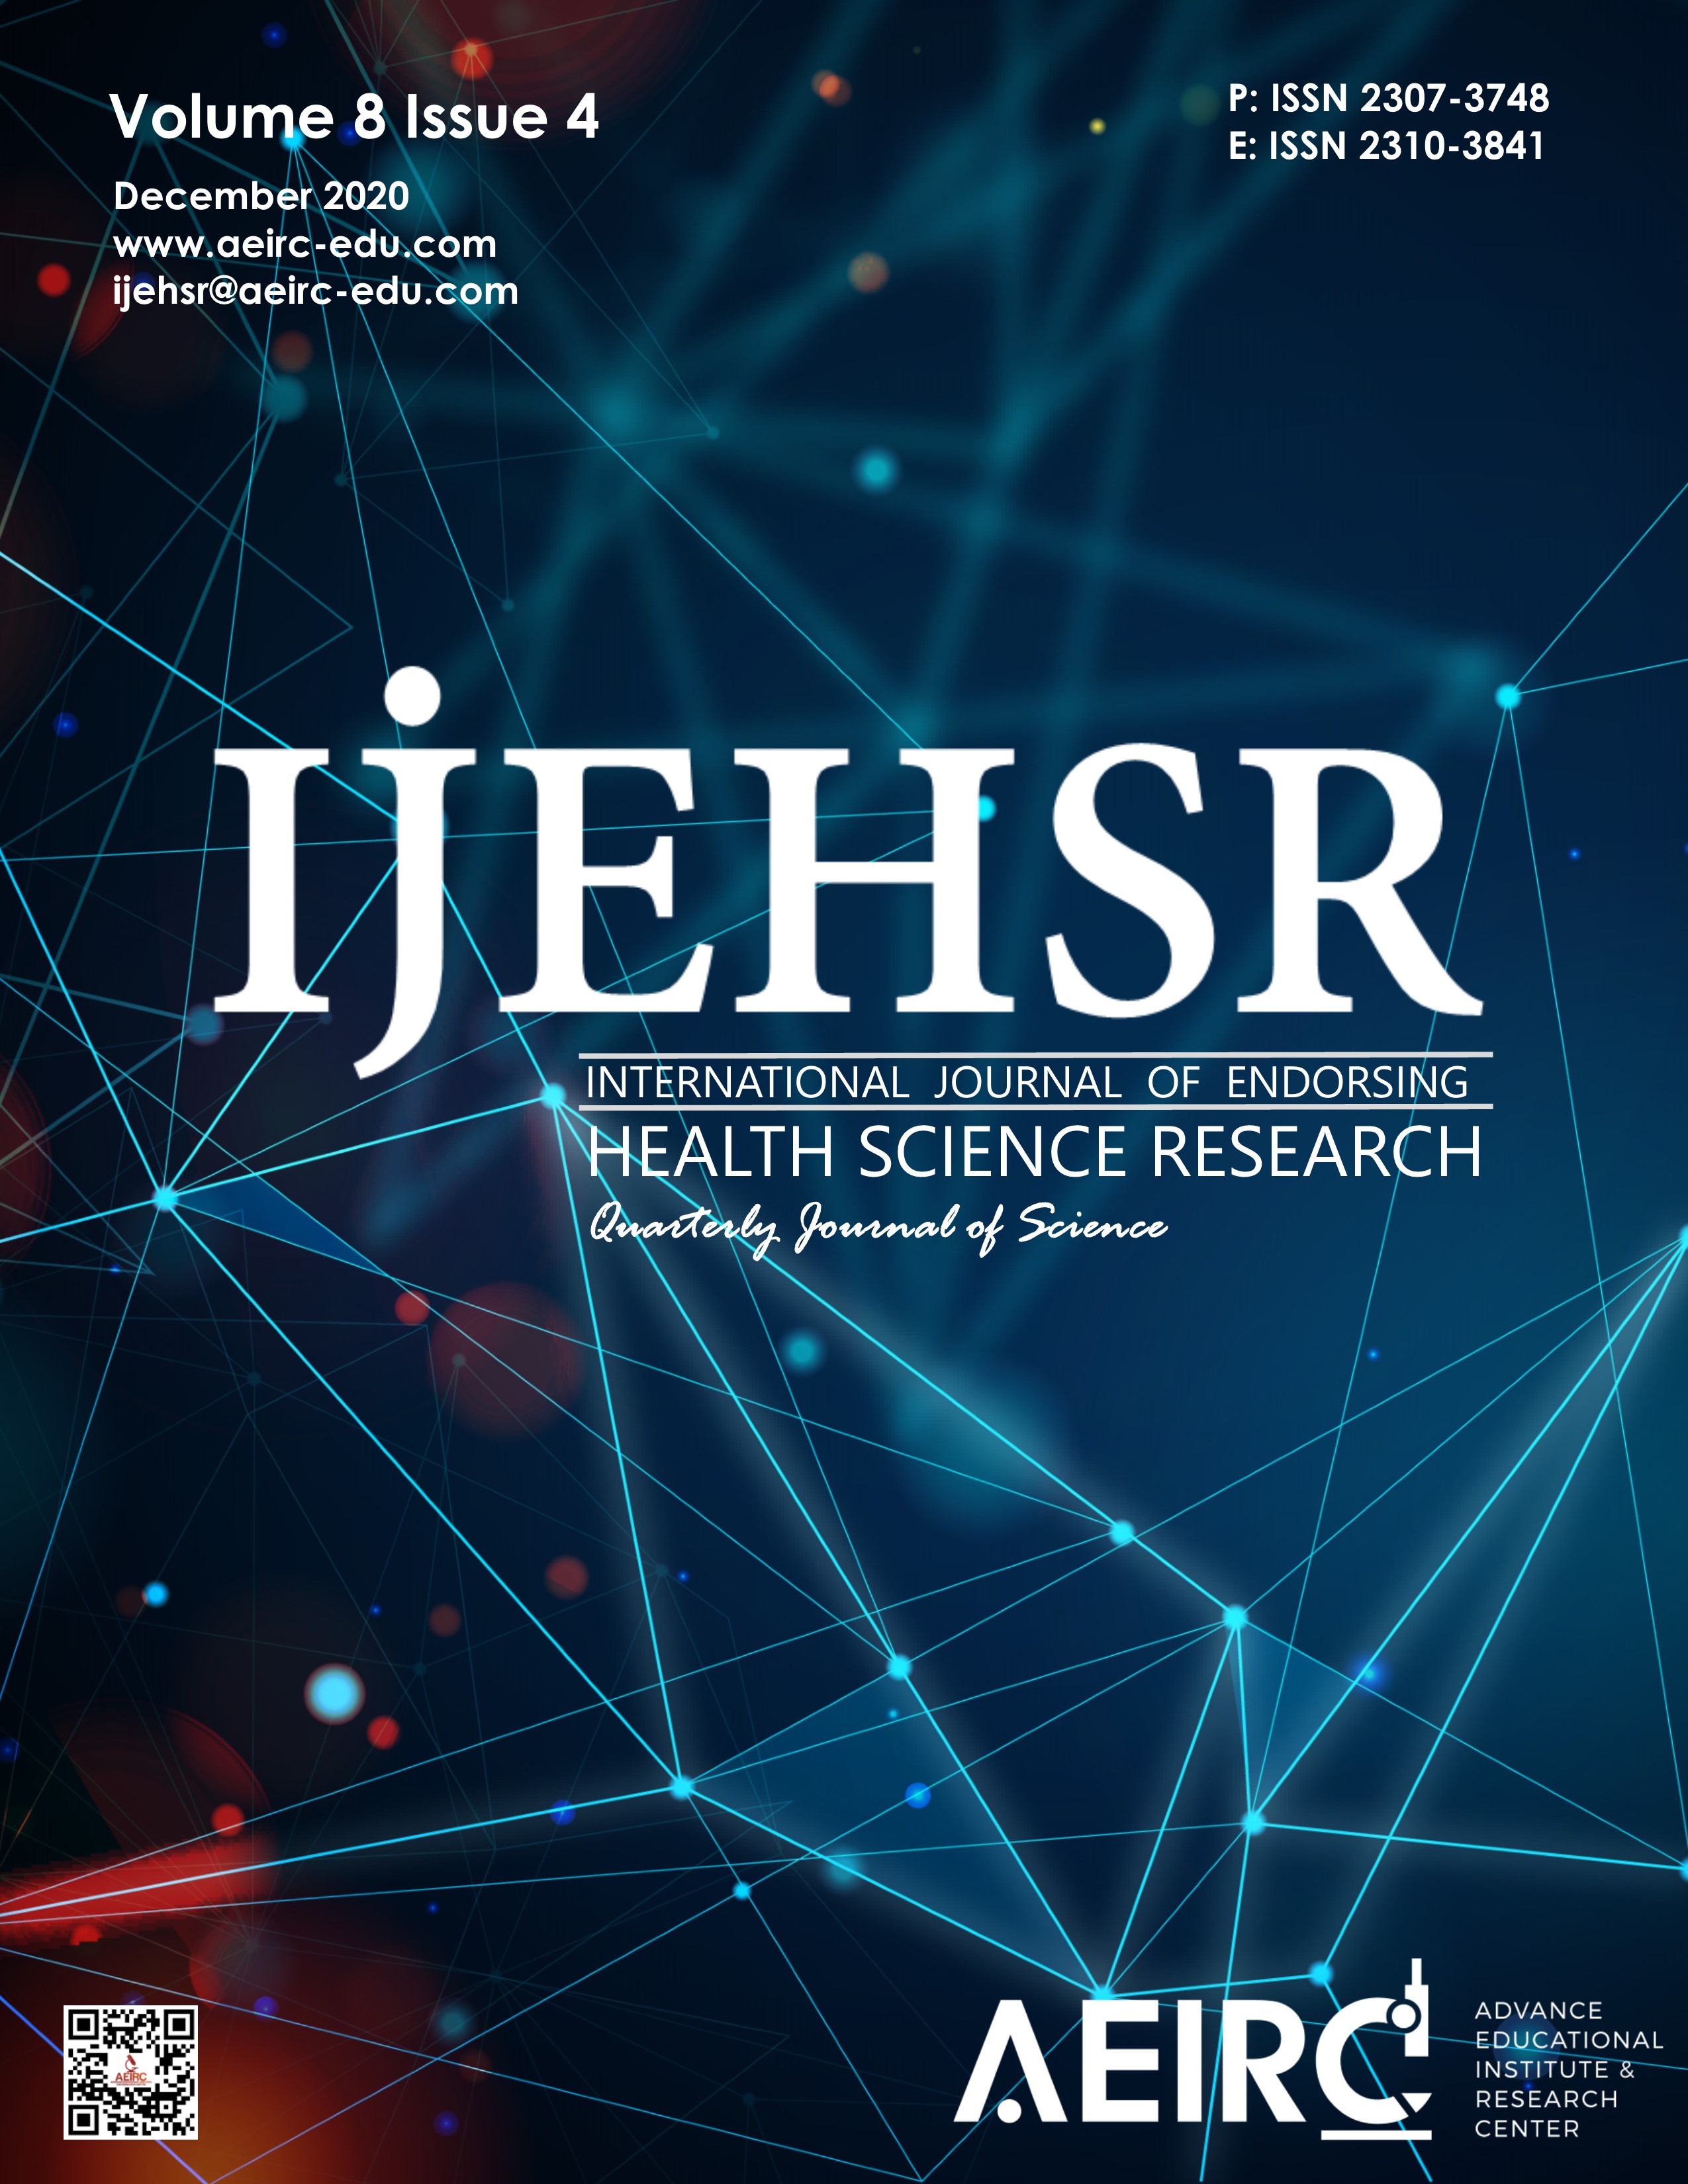 					View Vol. 8 No. 4 (2020): International Journal of Endorsing Health Science Research
				